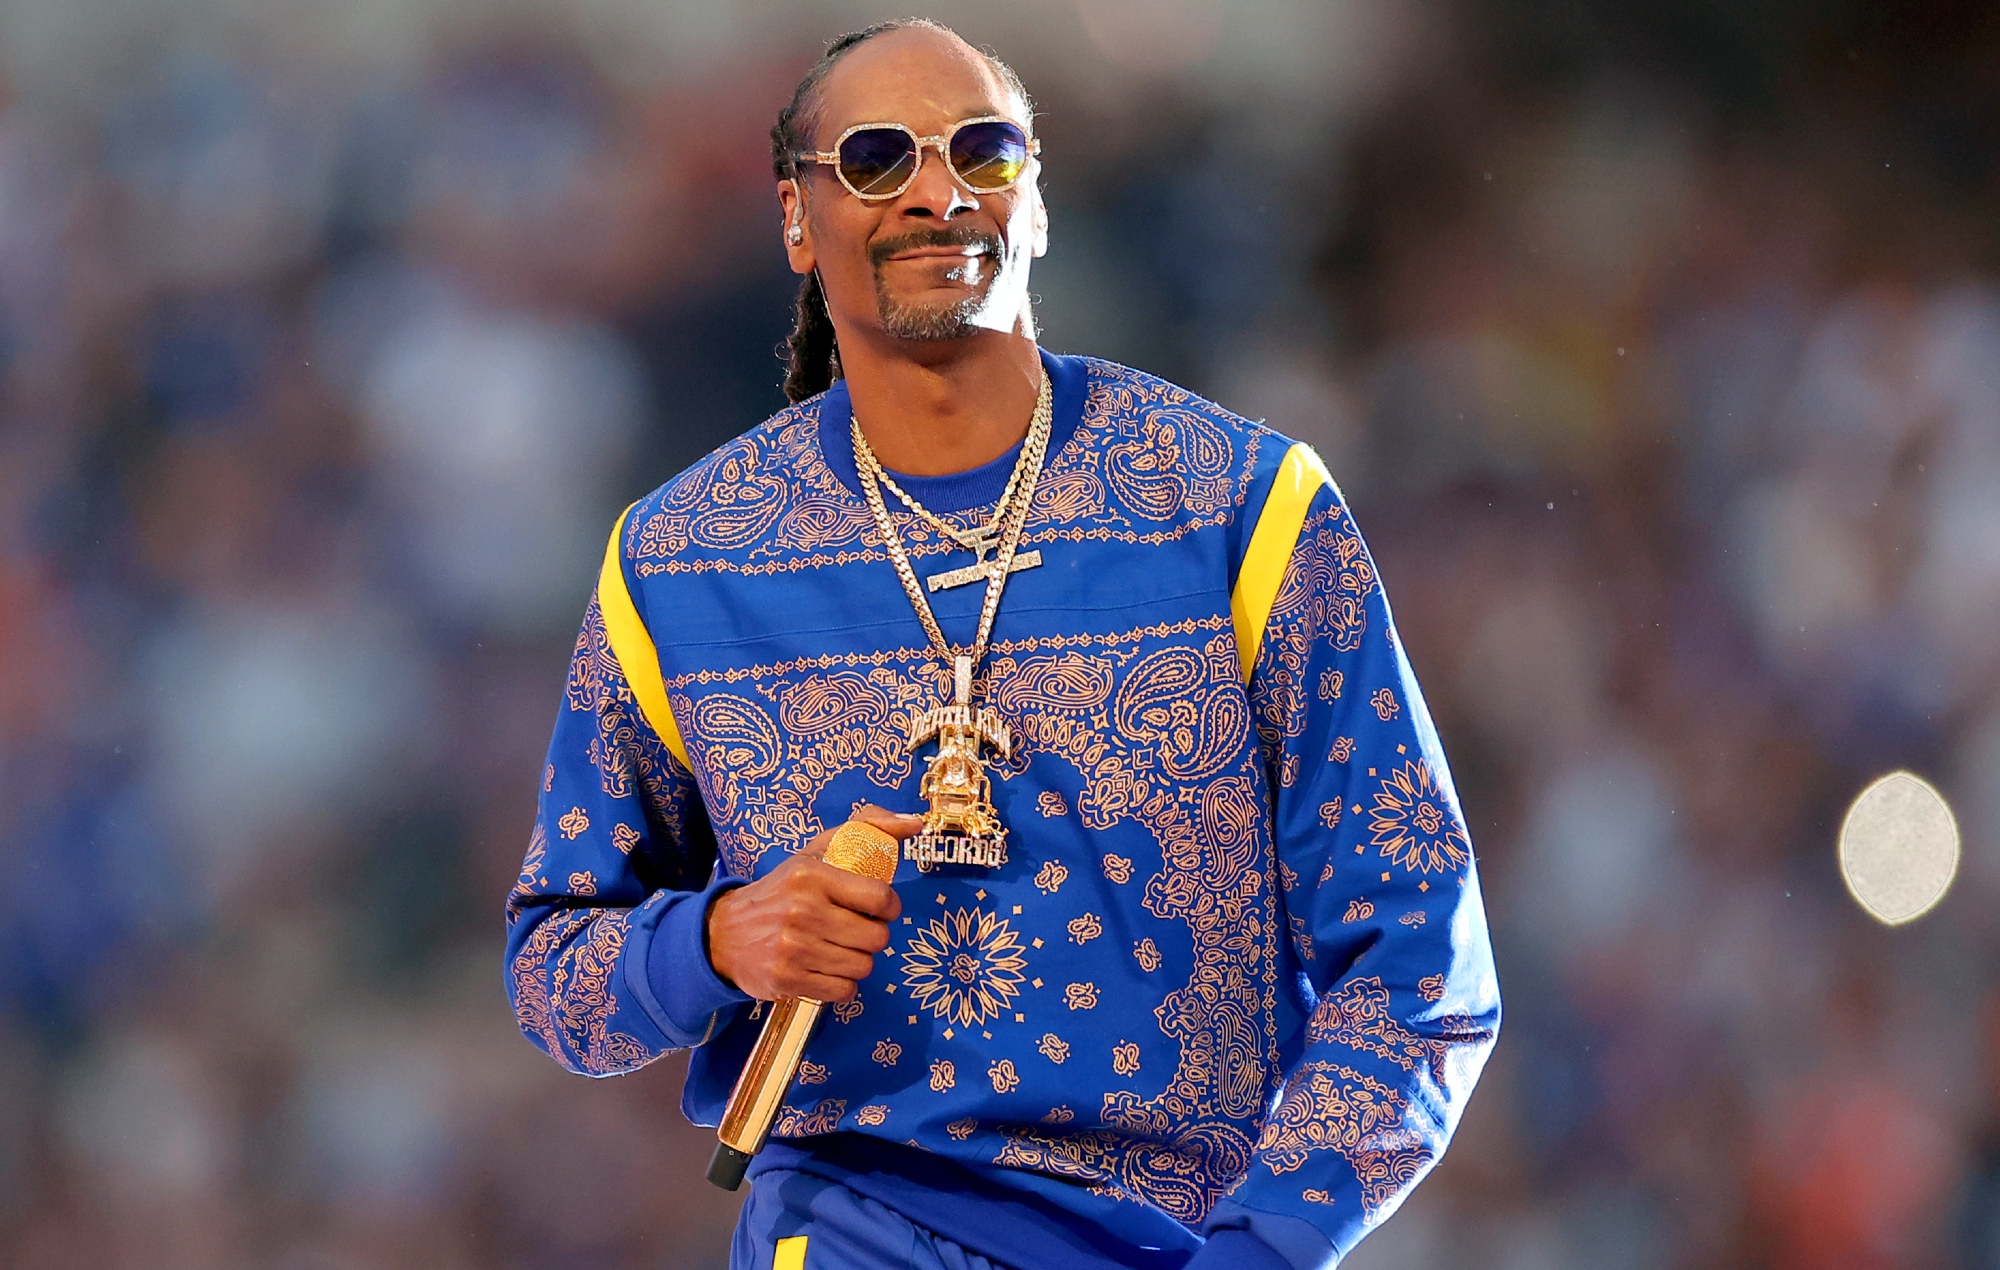 how much is snoop dogg worth